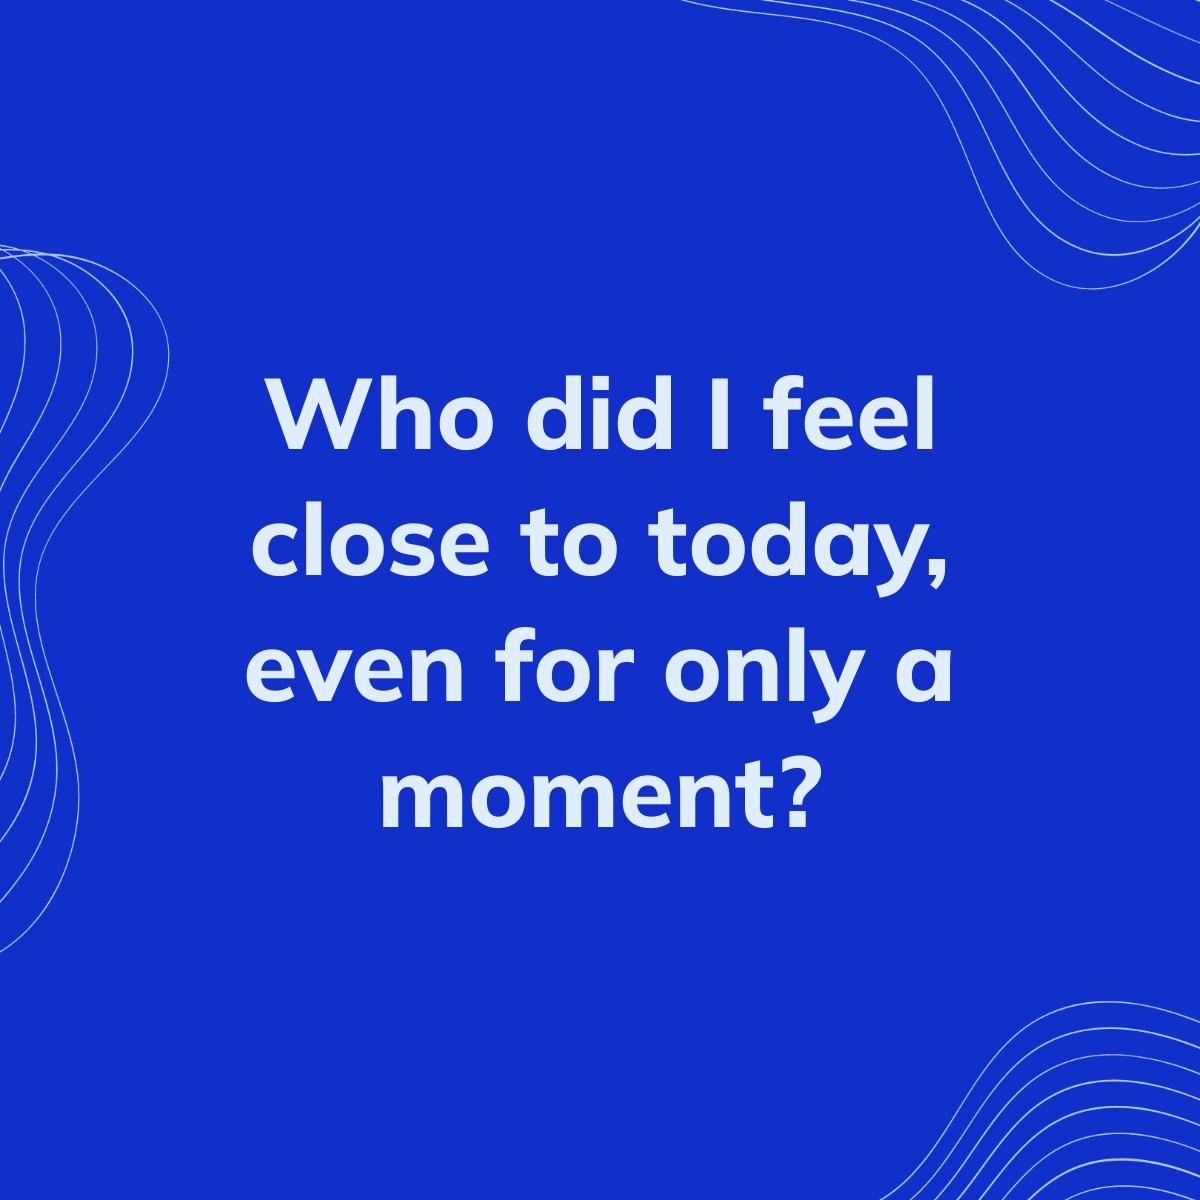 Journal Prompt: Who did I feel close to today, even for only a moment?